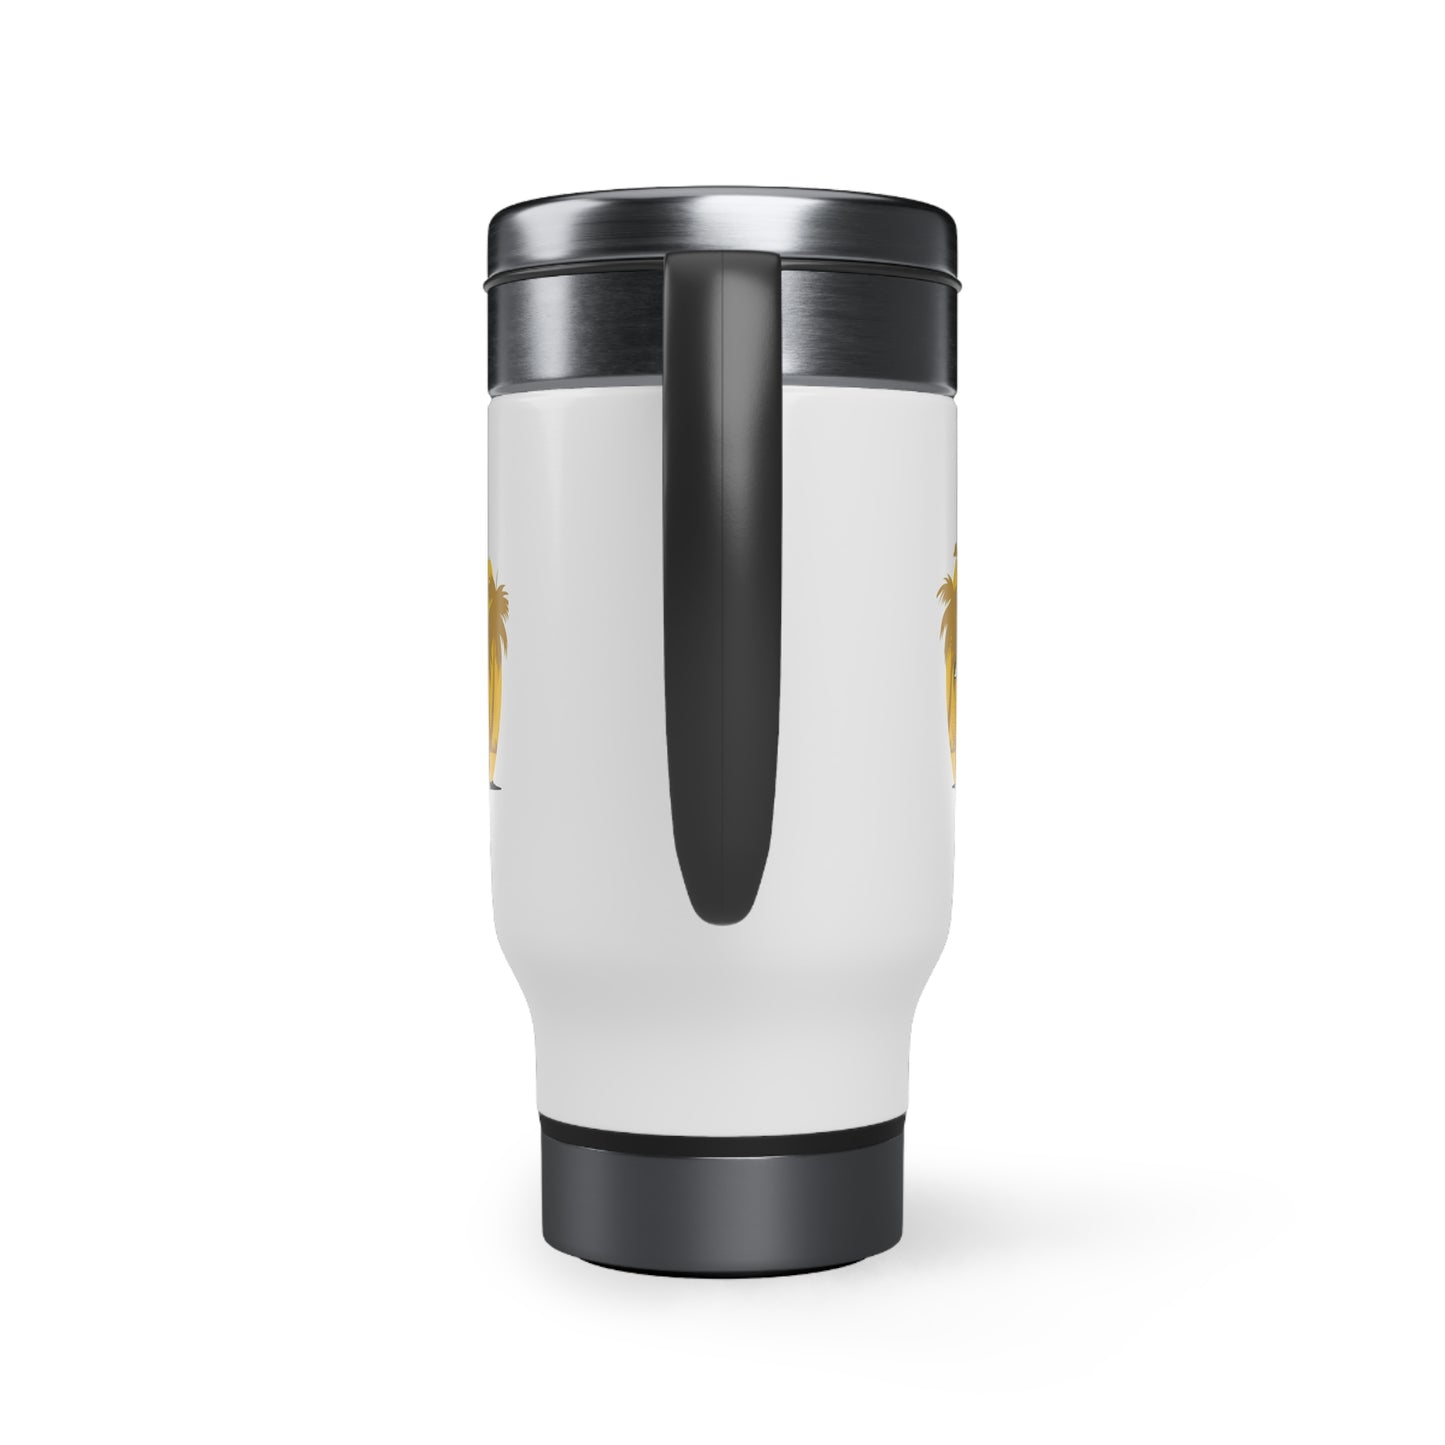 Chill on beach - Stainless Steel Travel Mug with Handle, 14oz